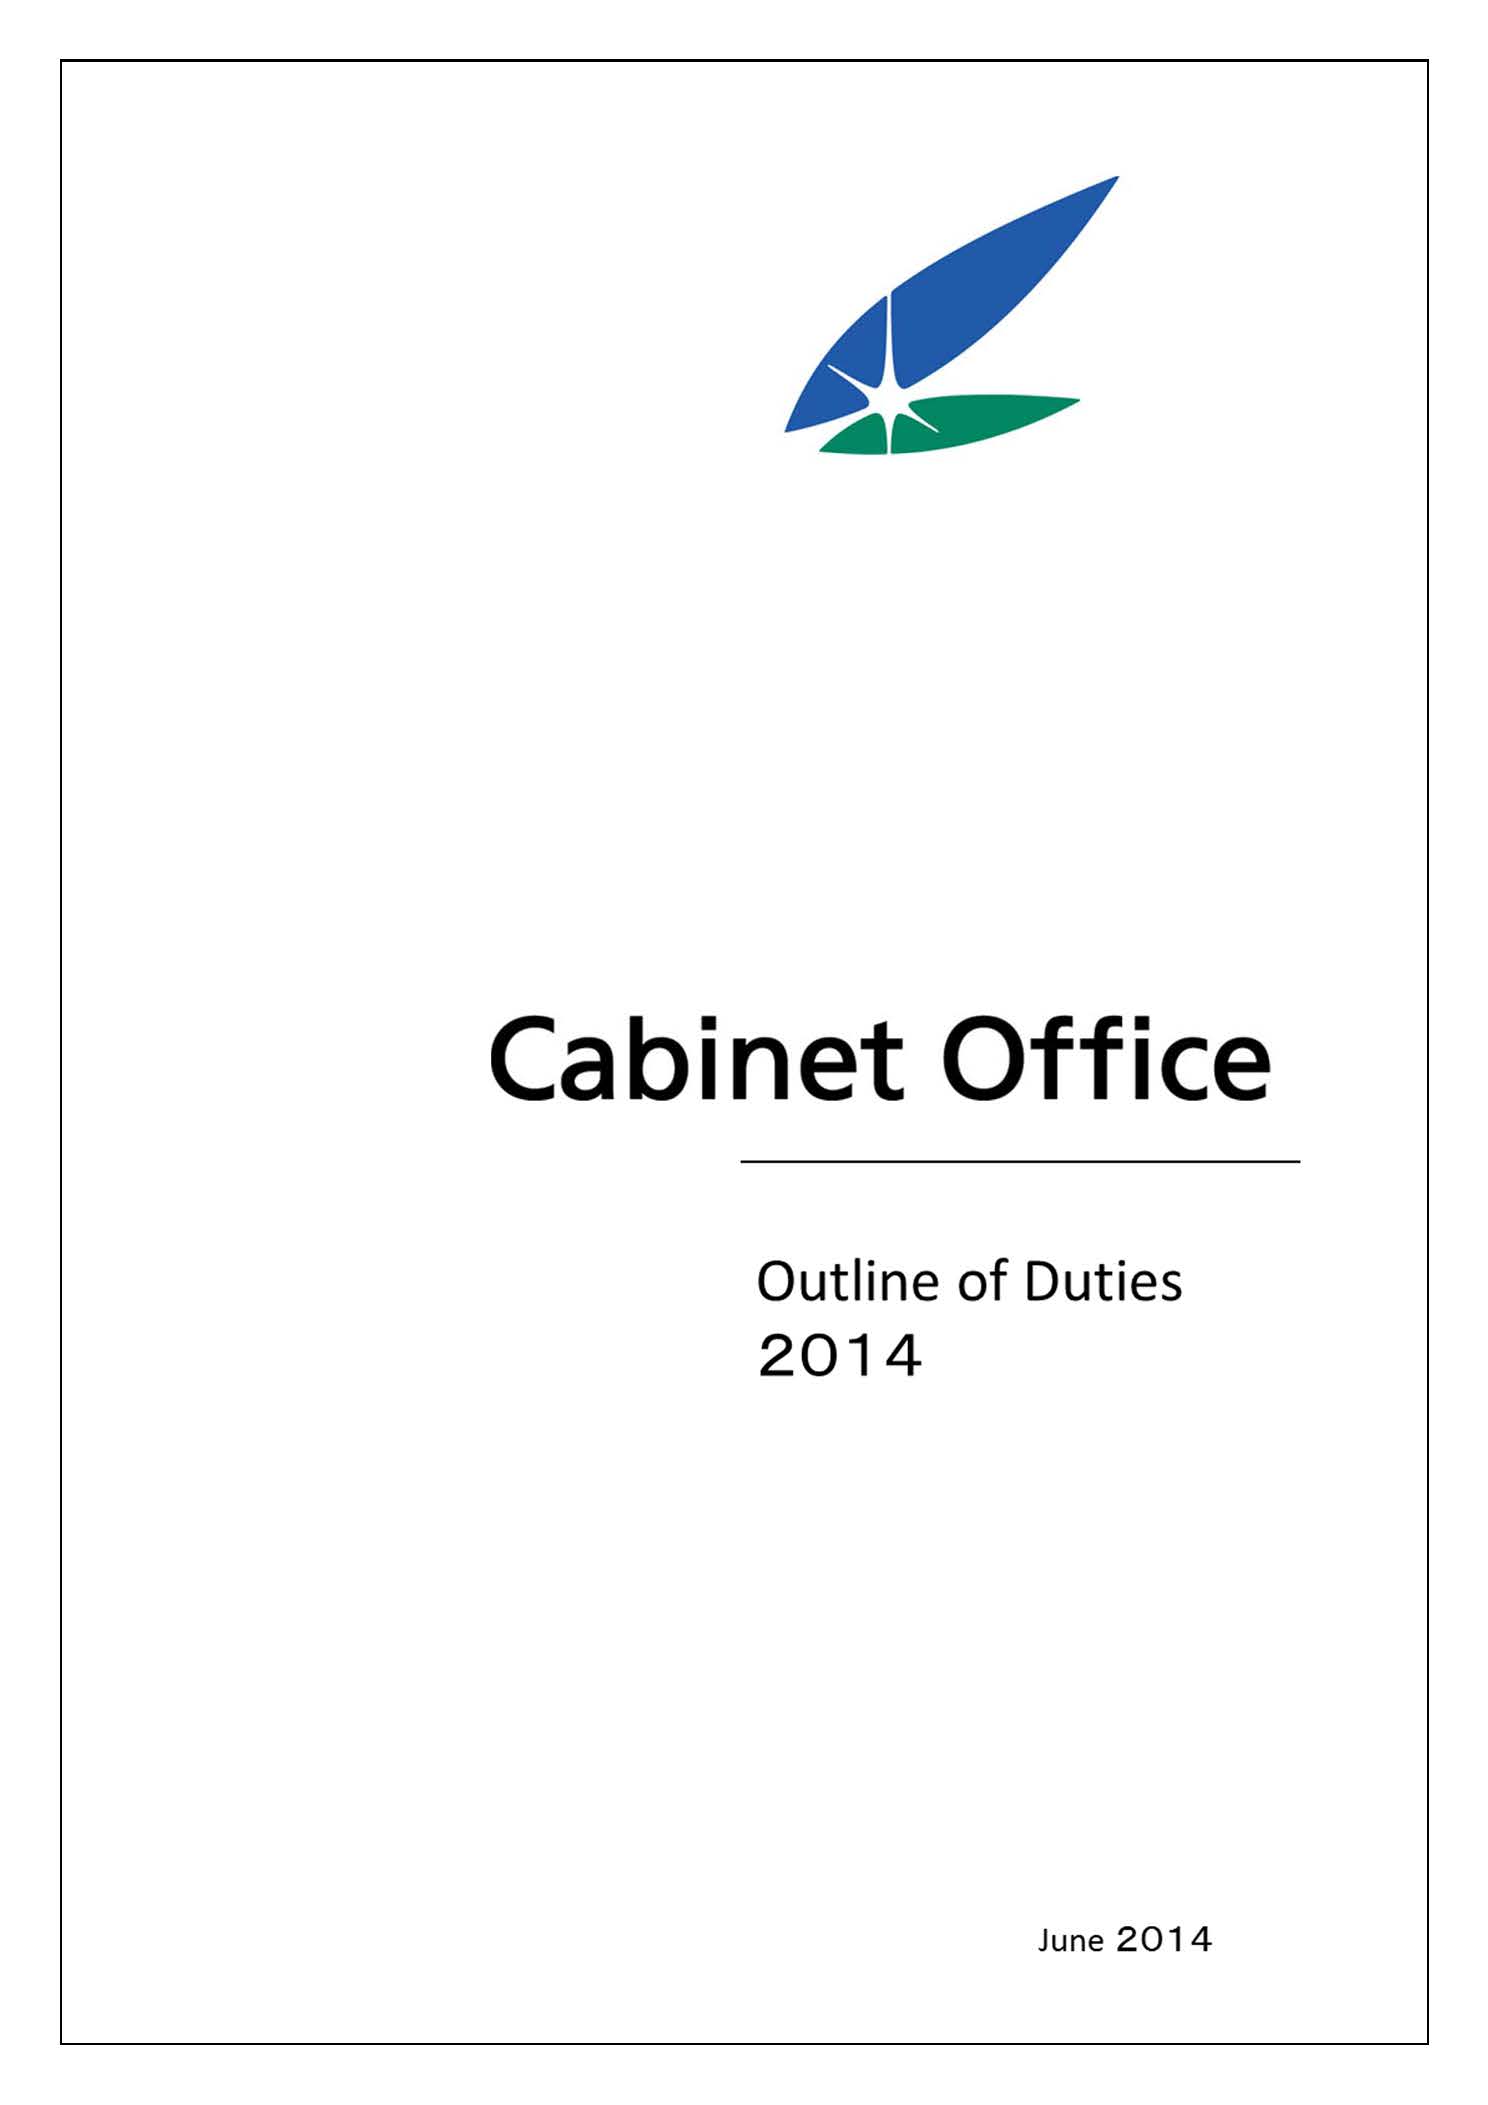 Outline of Duties 2014 Front Cover